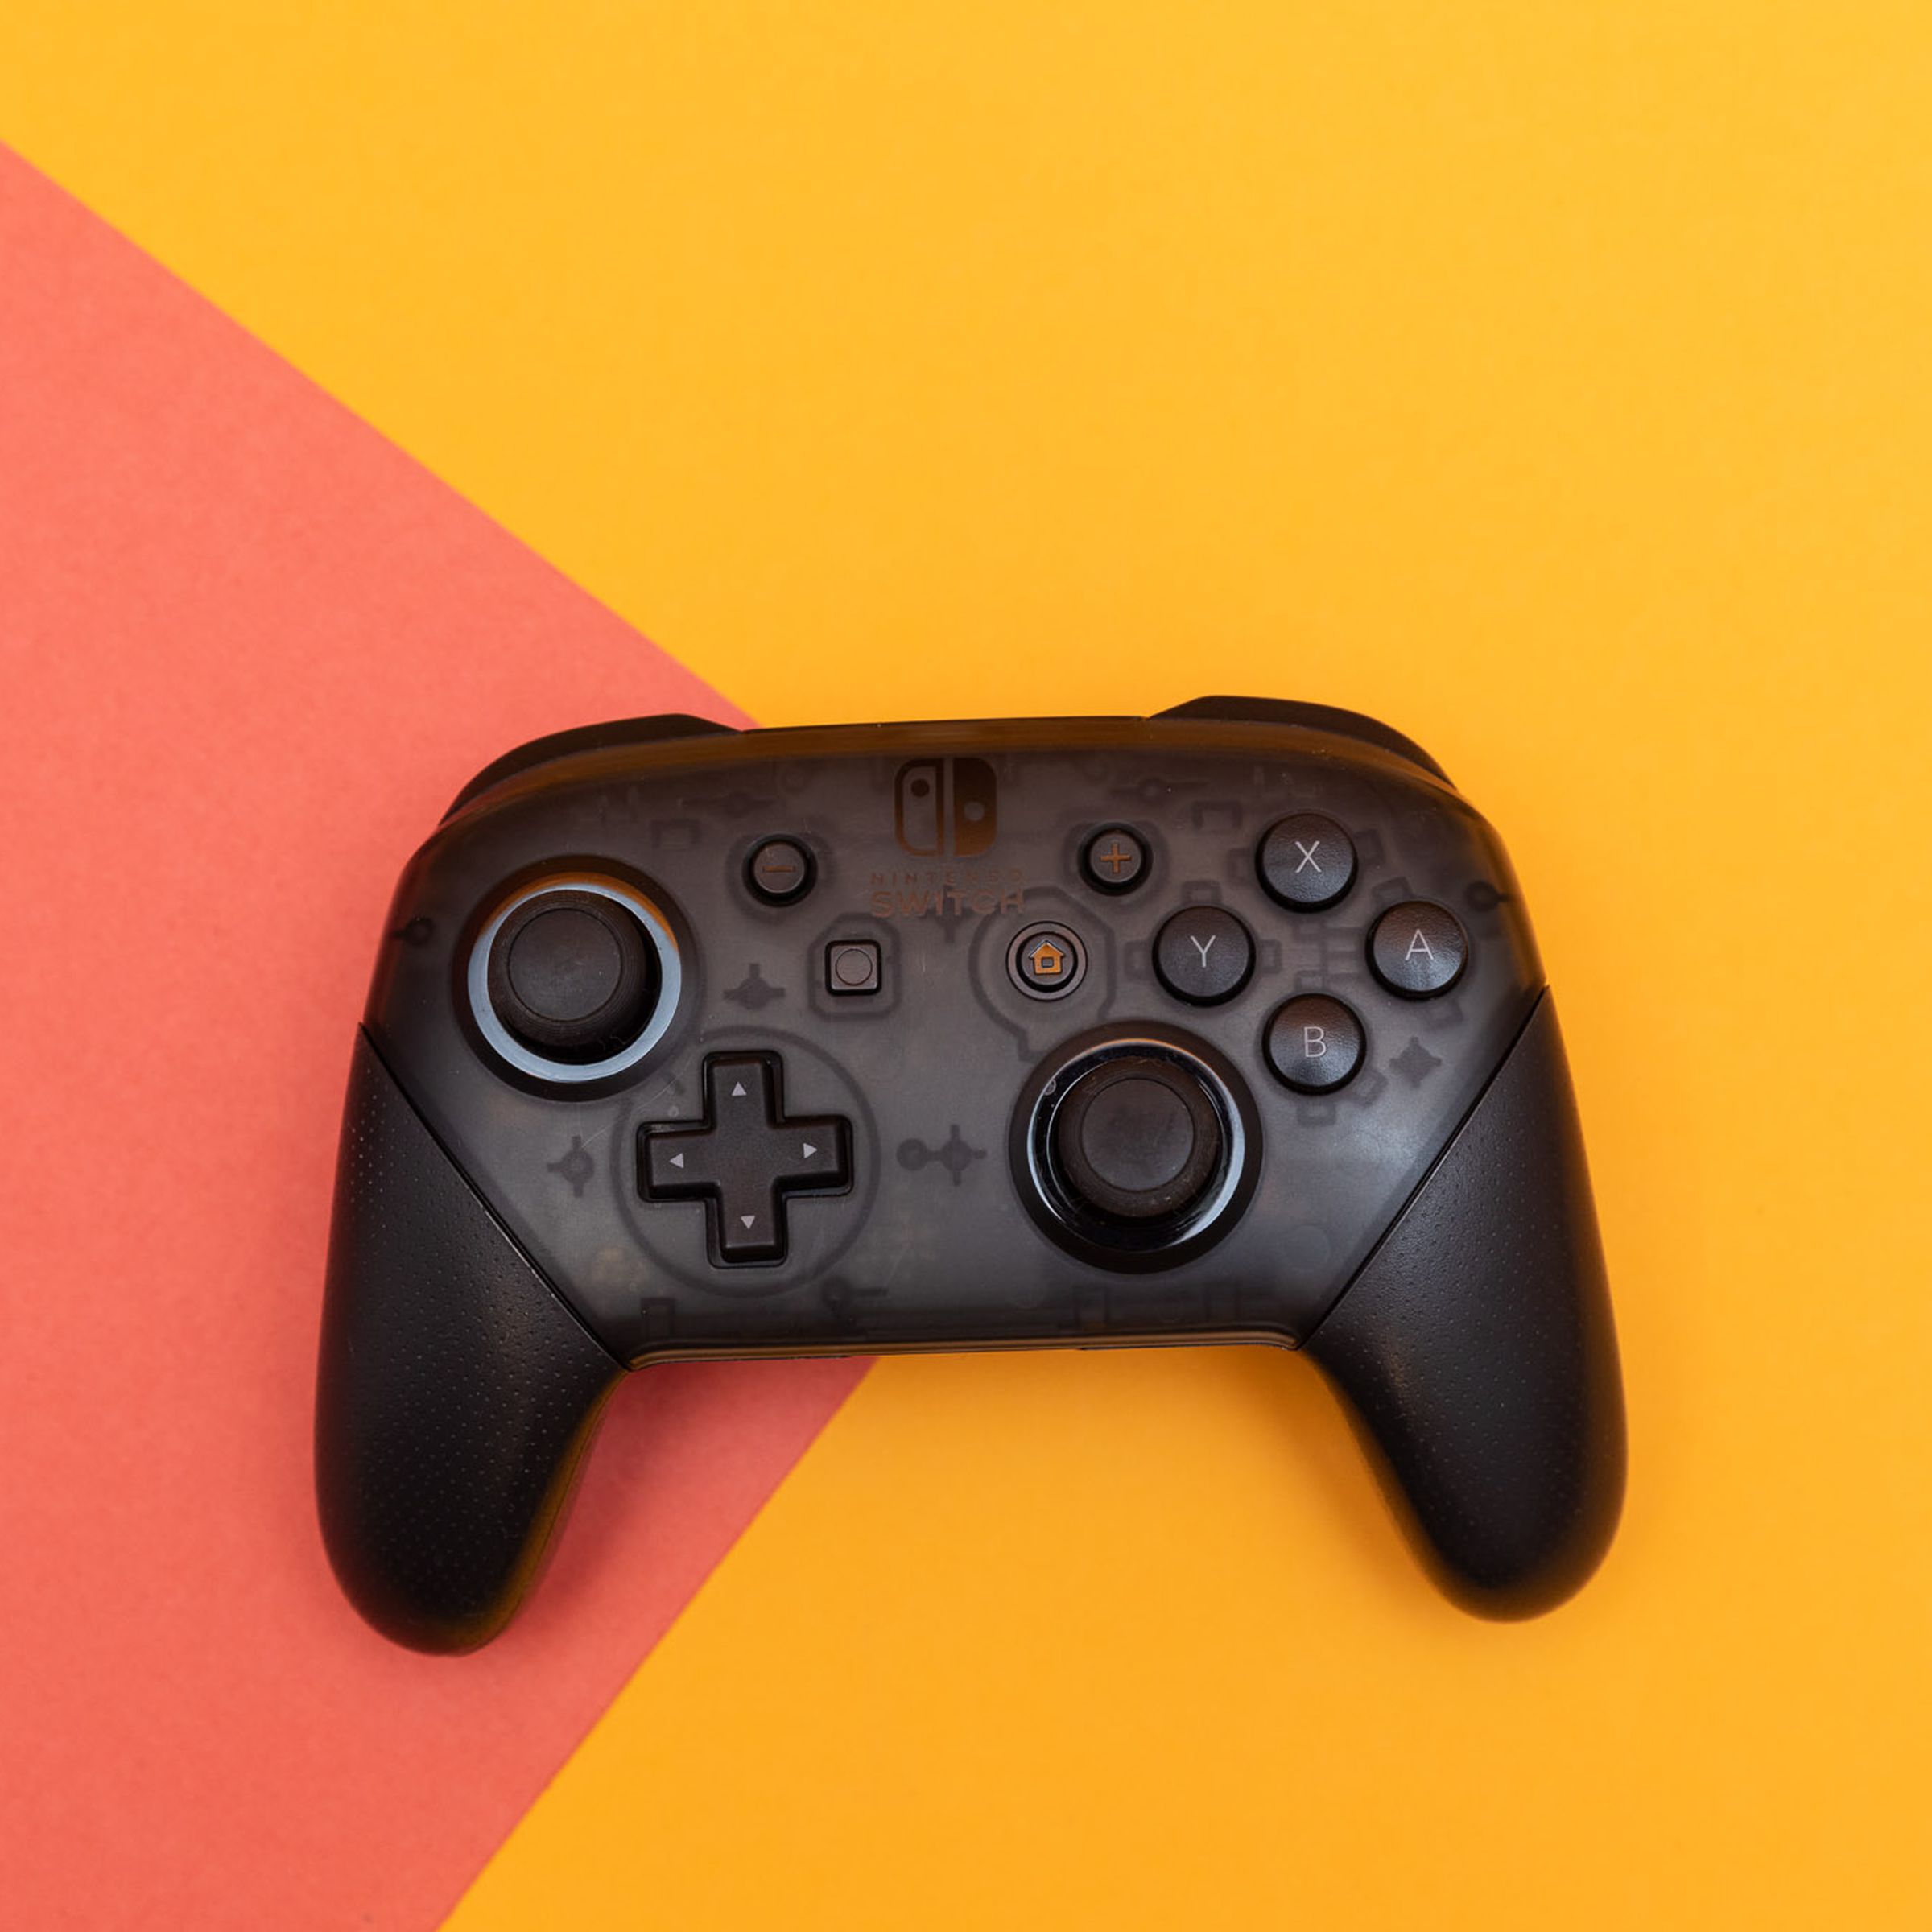 The Nintendo Switch Pro Controller sitting flat on a two-colored backdrop.